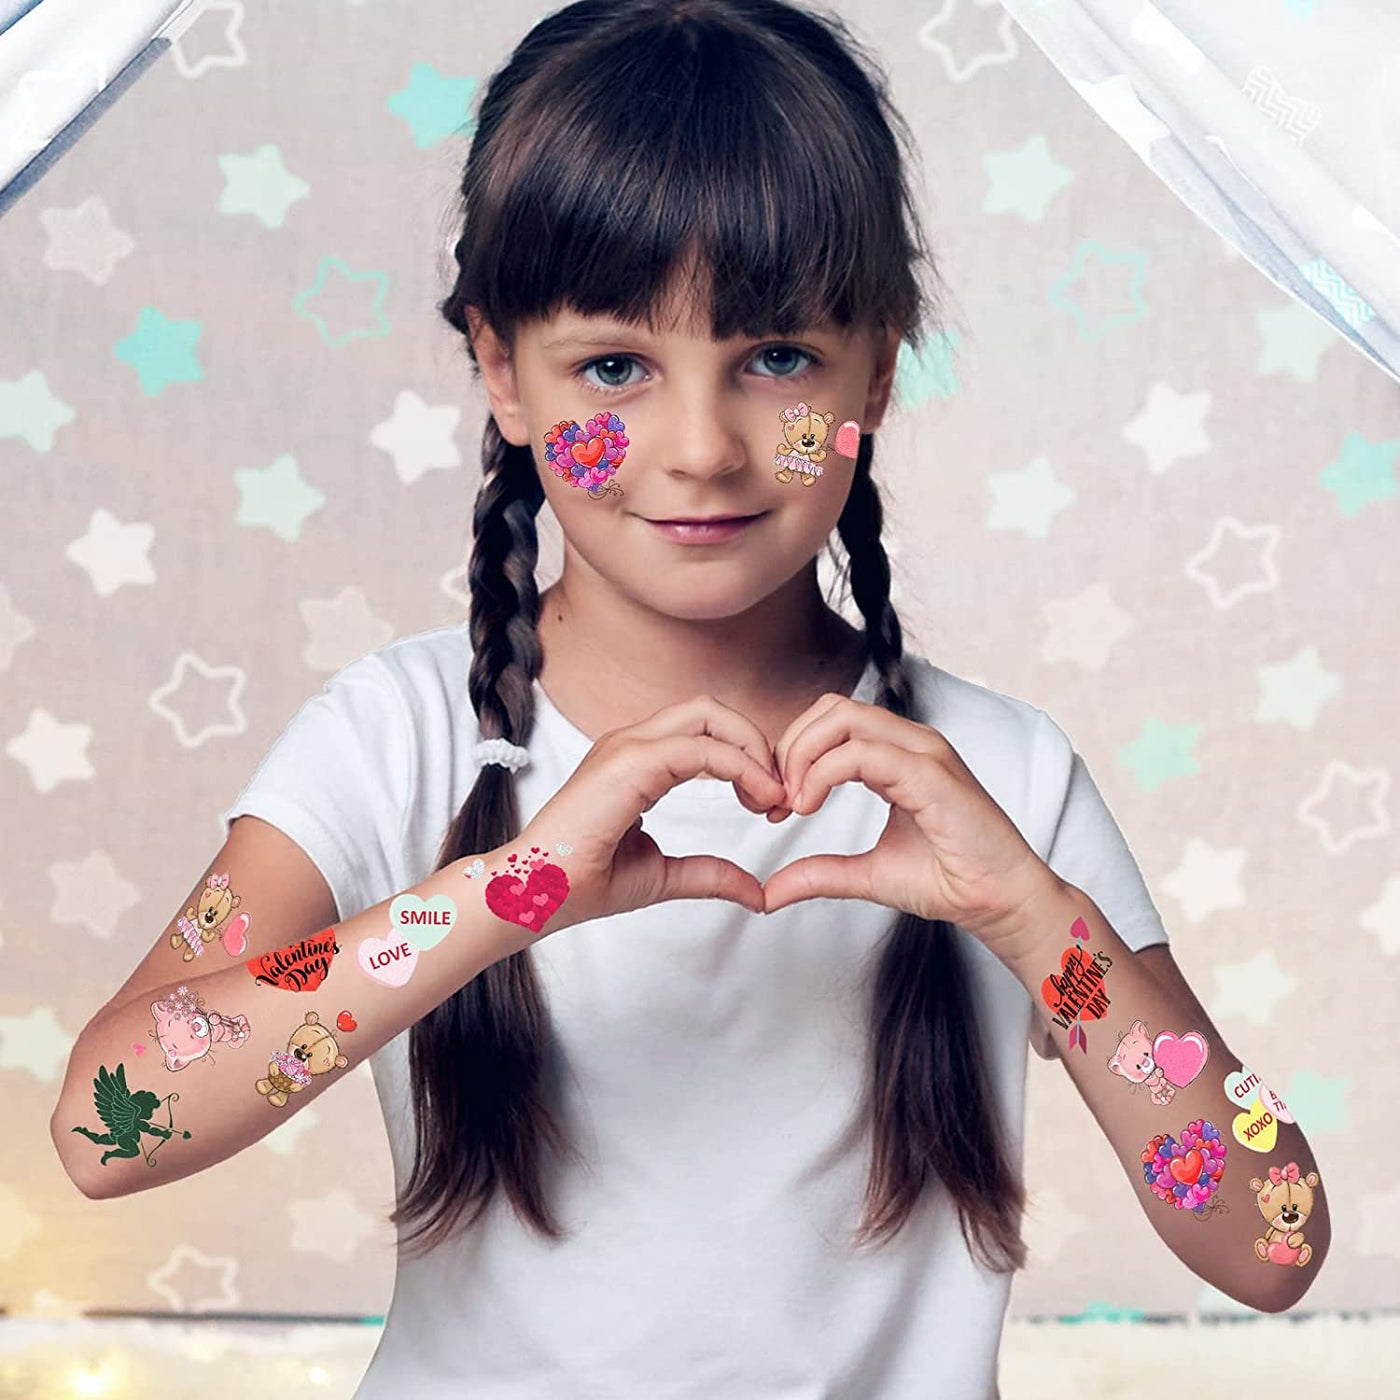 Valentines Glitter Tattoos for Kids, Temporary Tattoos in 12 Cute Designs, 144 Pack